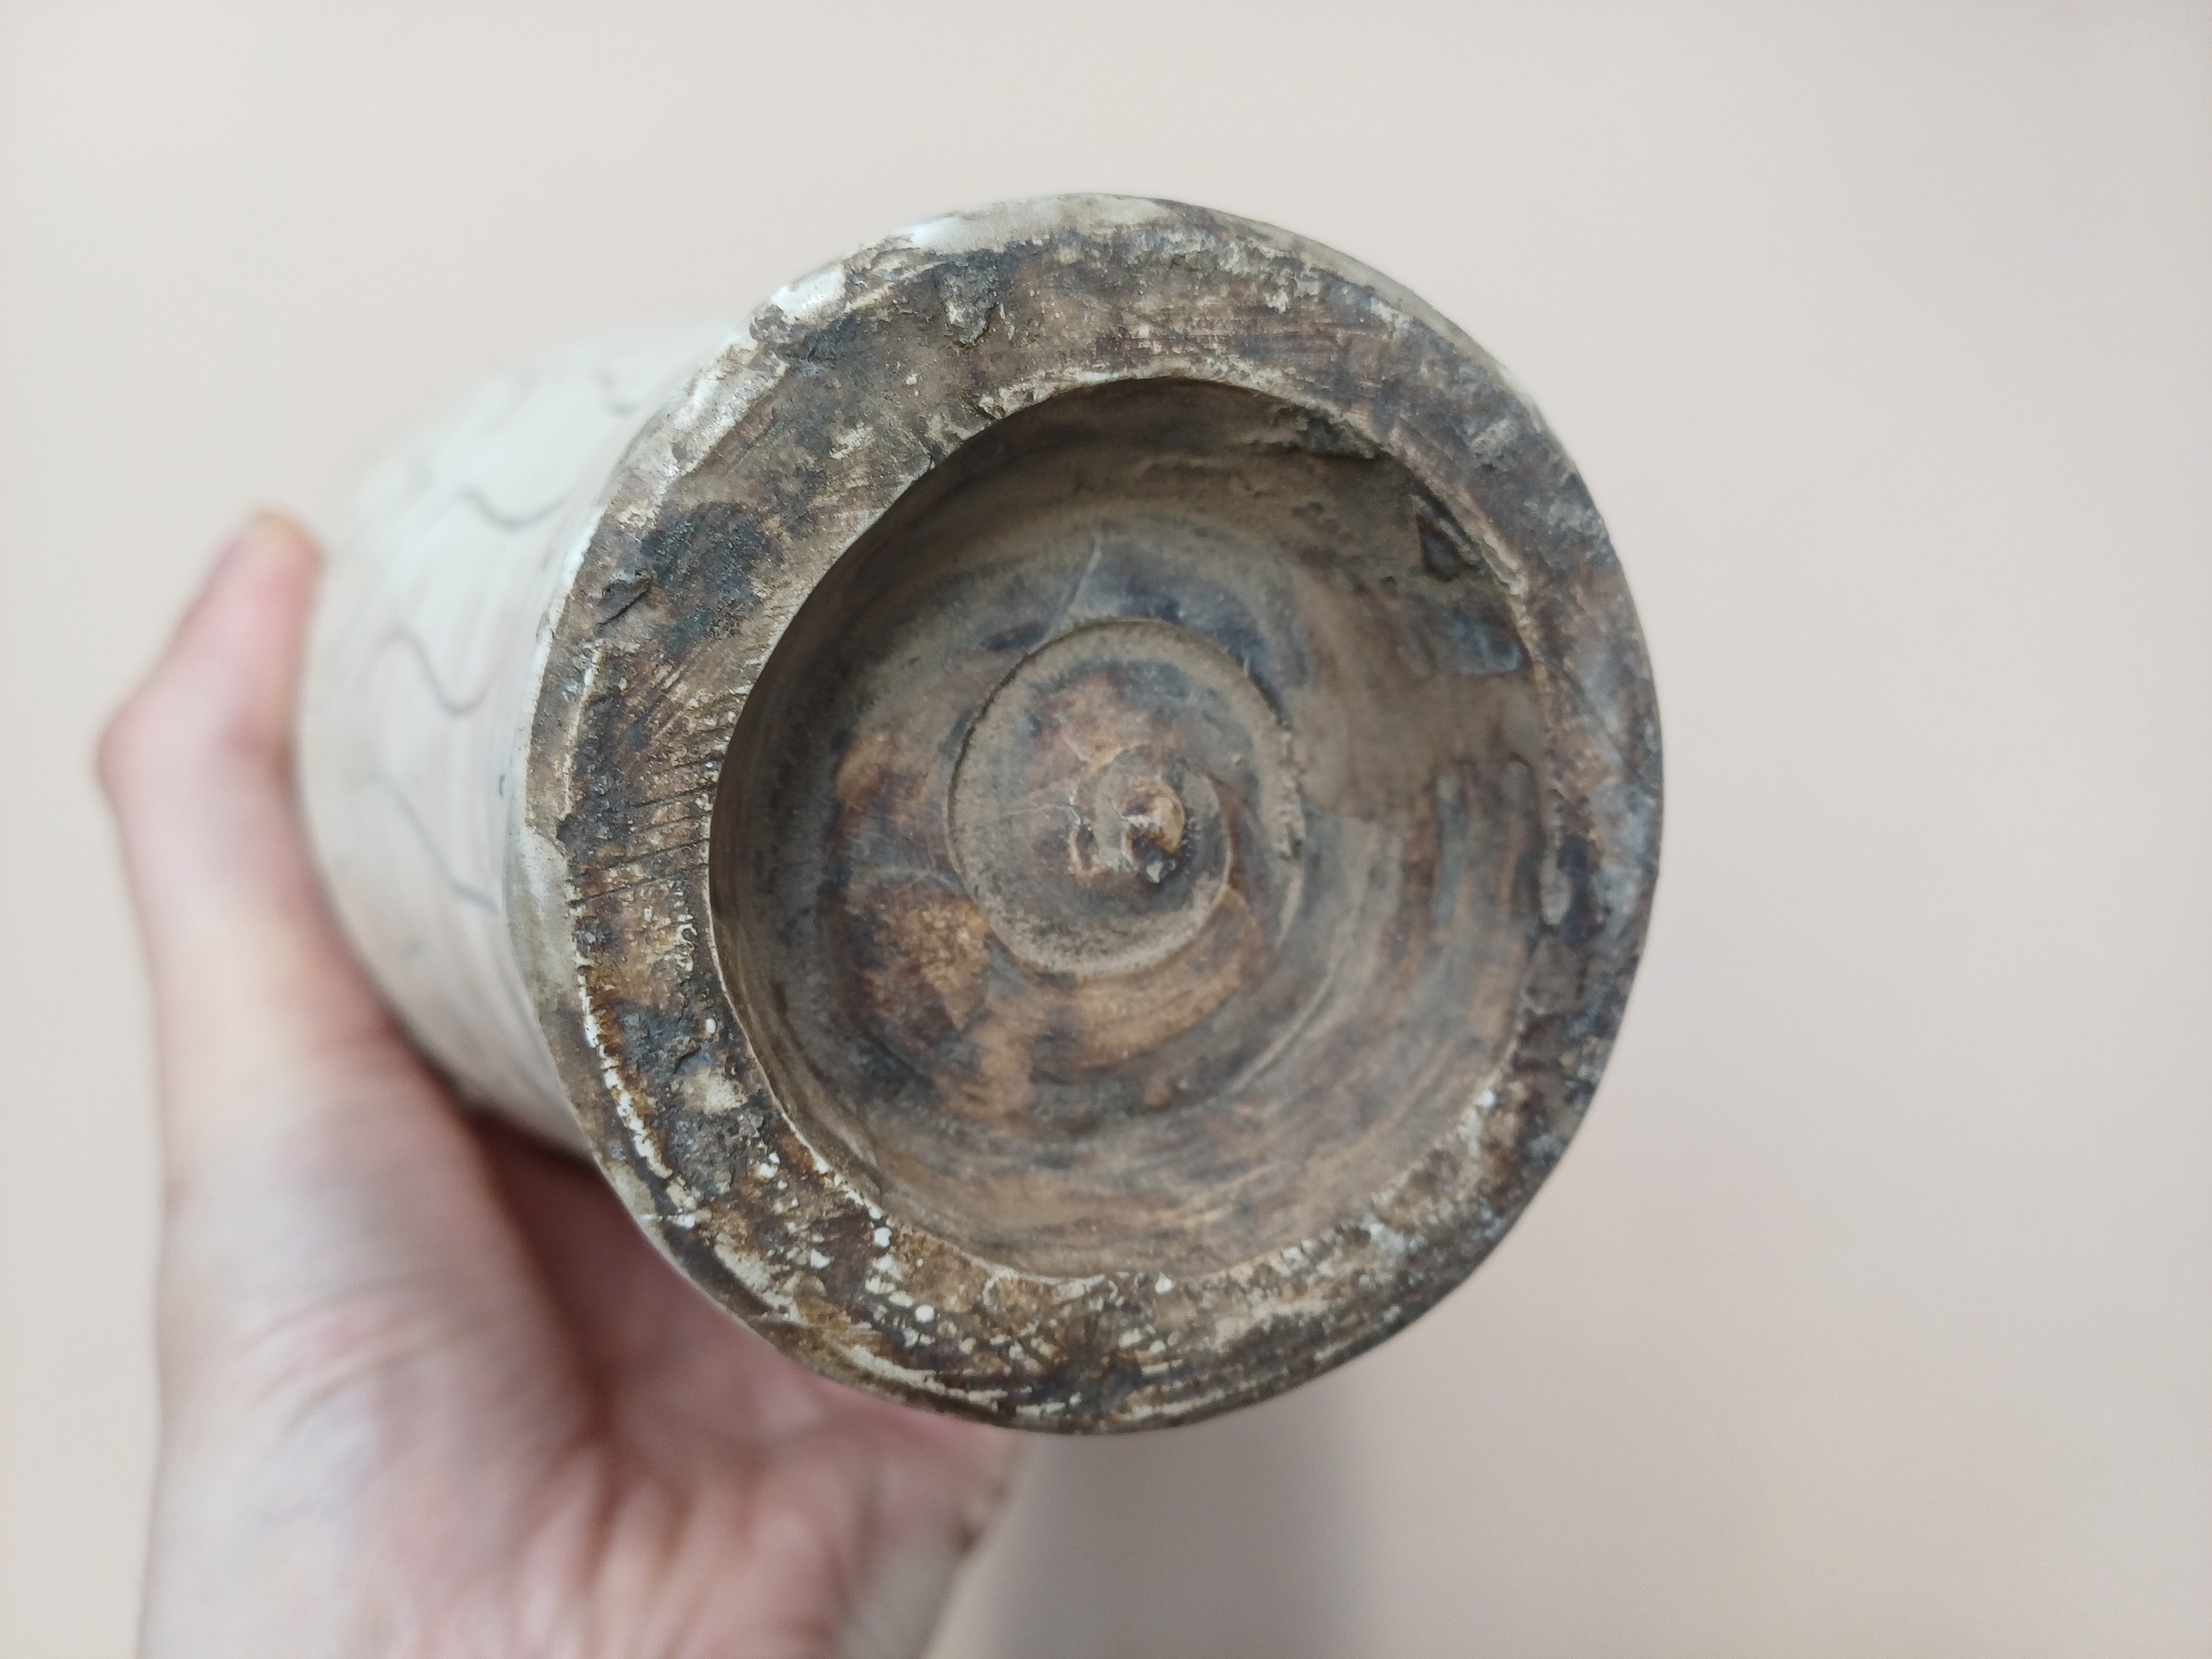 A CHINESE CIZHOU-STYLE INCISED VASE 二十世紀 仿磁州窰白釉劃花梅瓶 - Image 6 of 9